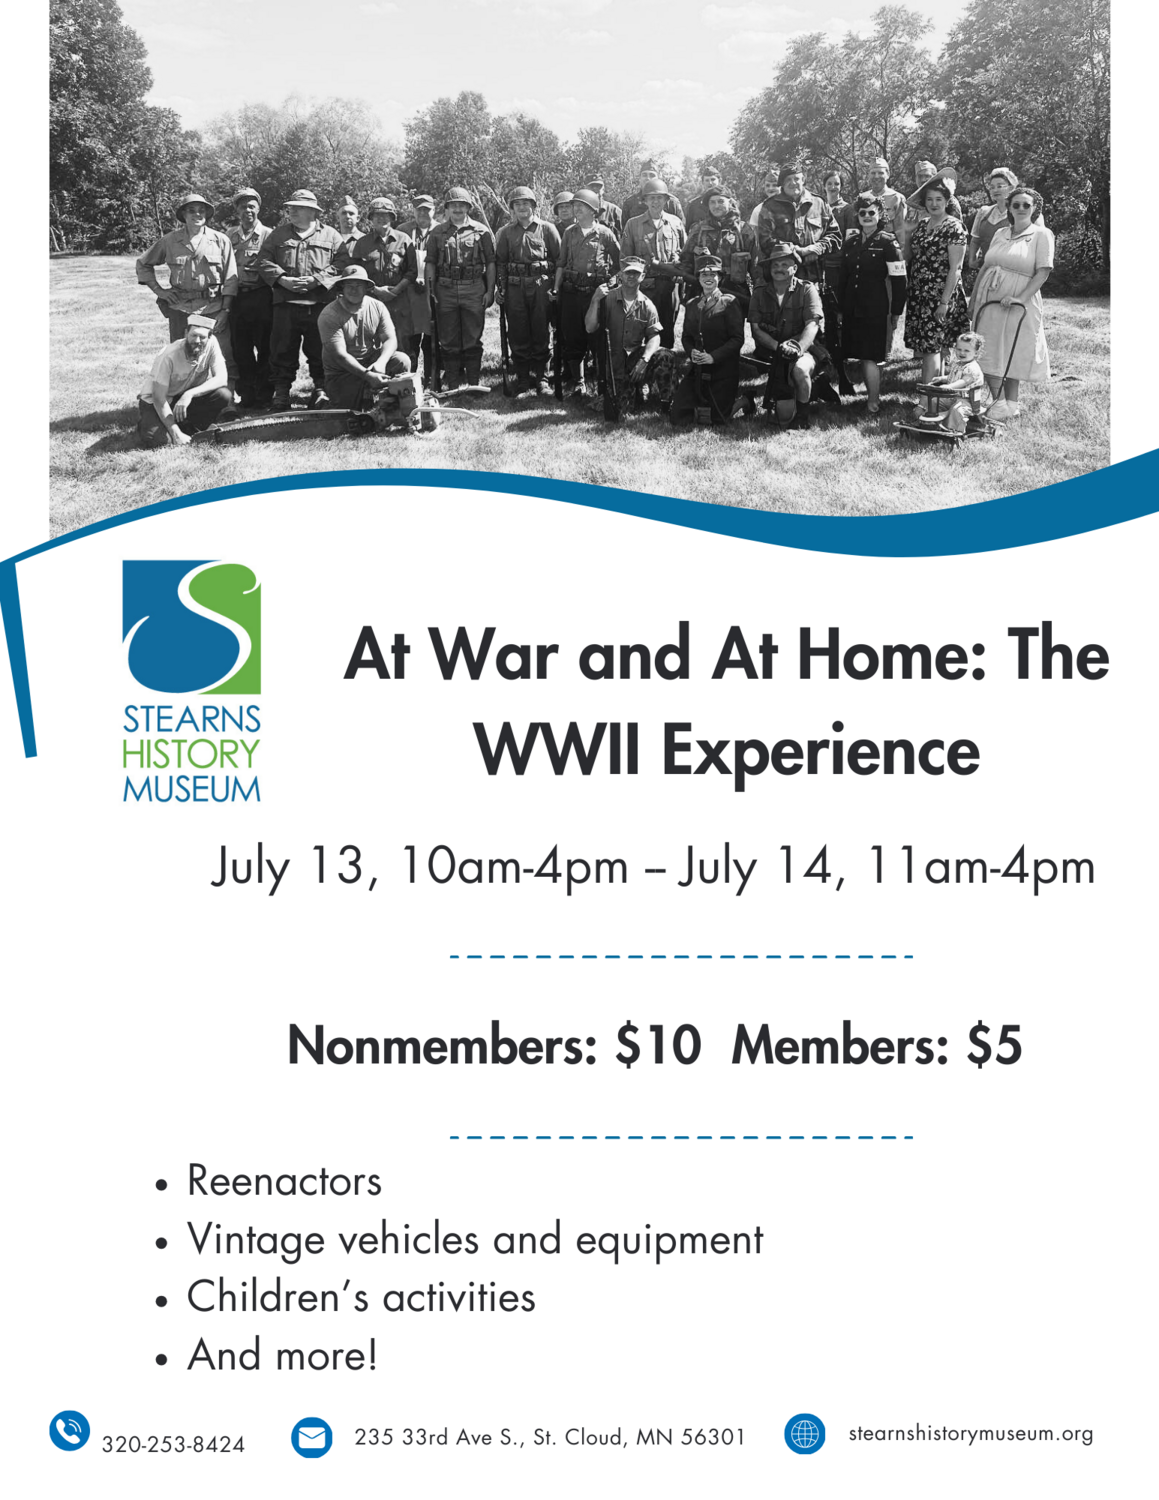 At War and At Home: the World War II Experience